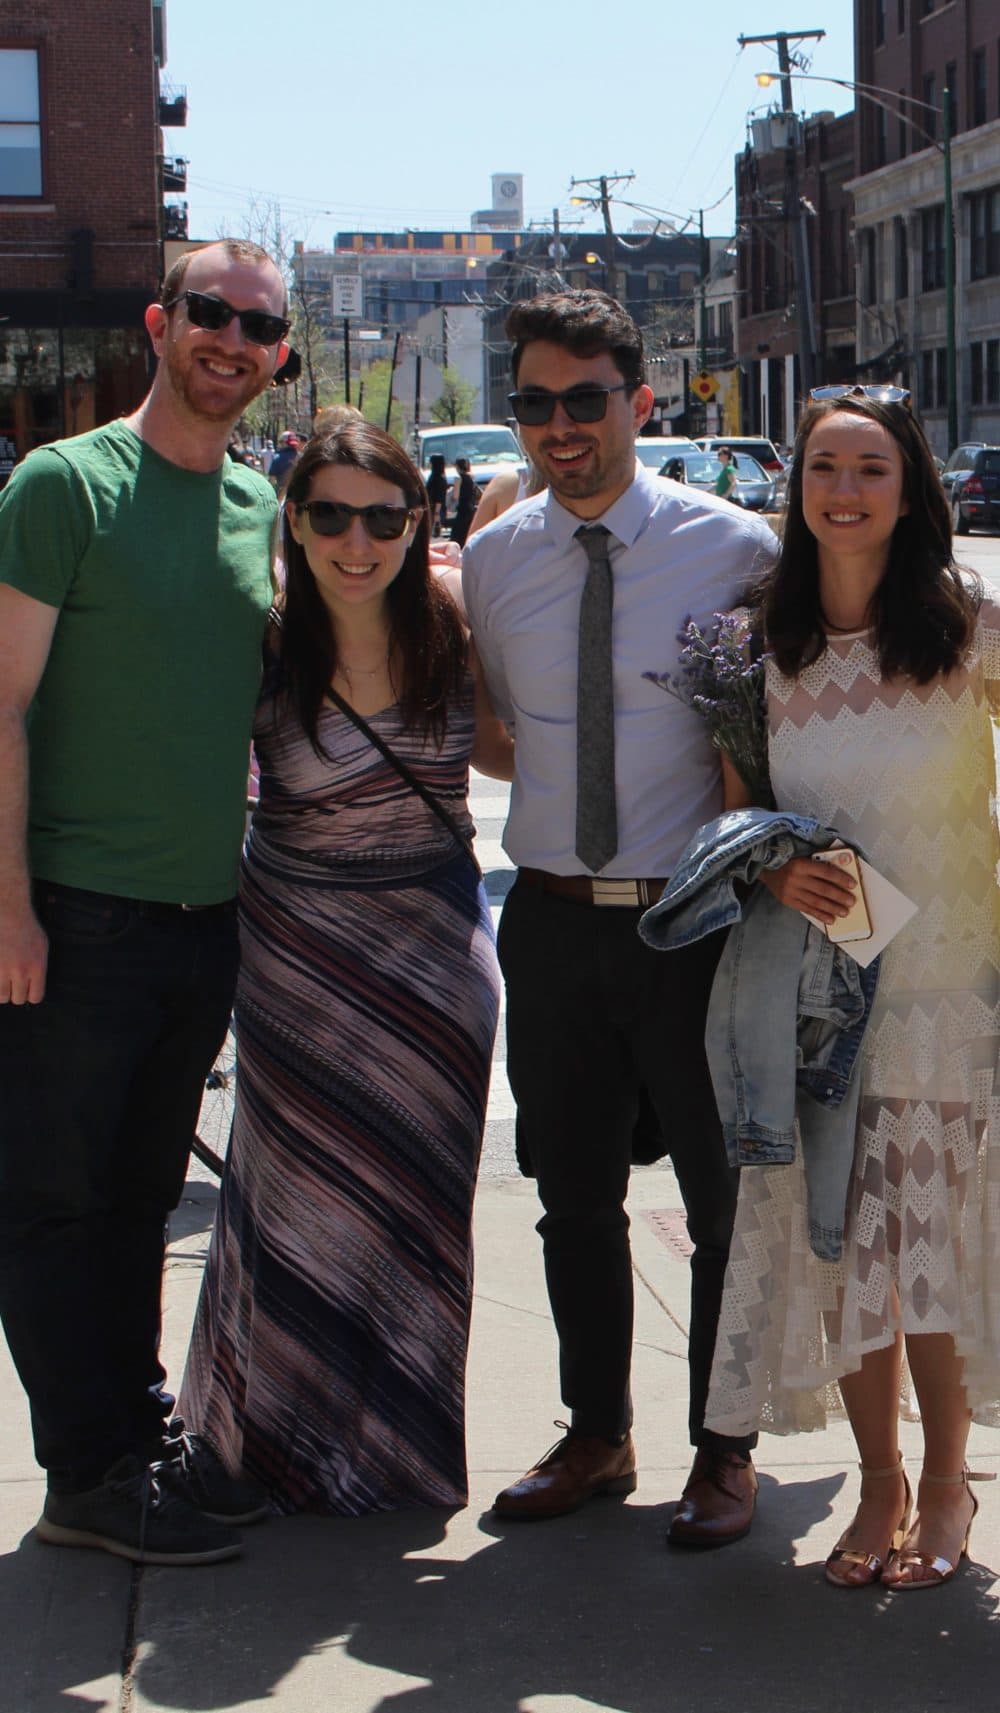 Kevin and Marina with their partners, Sam and Annie